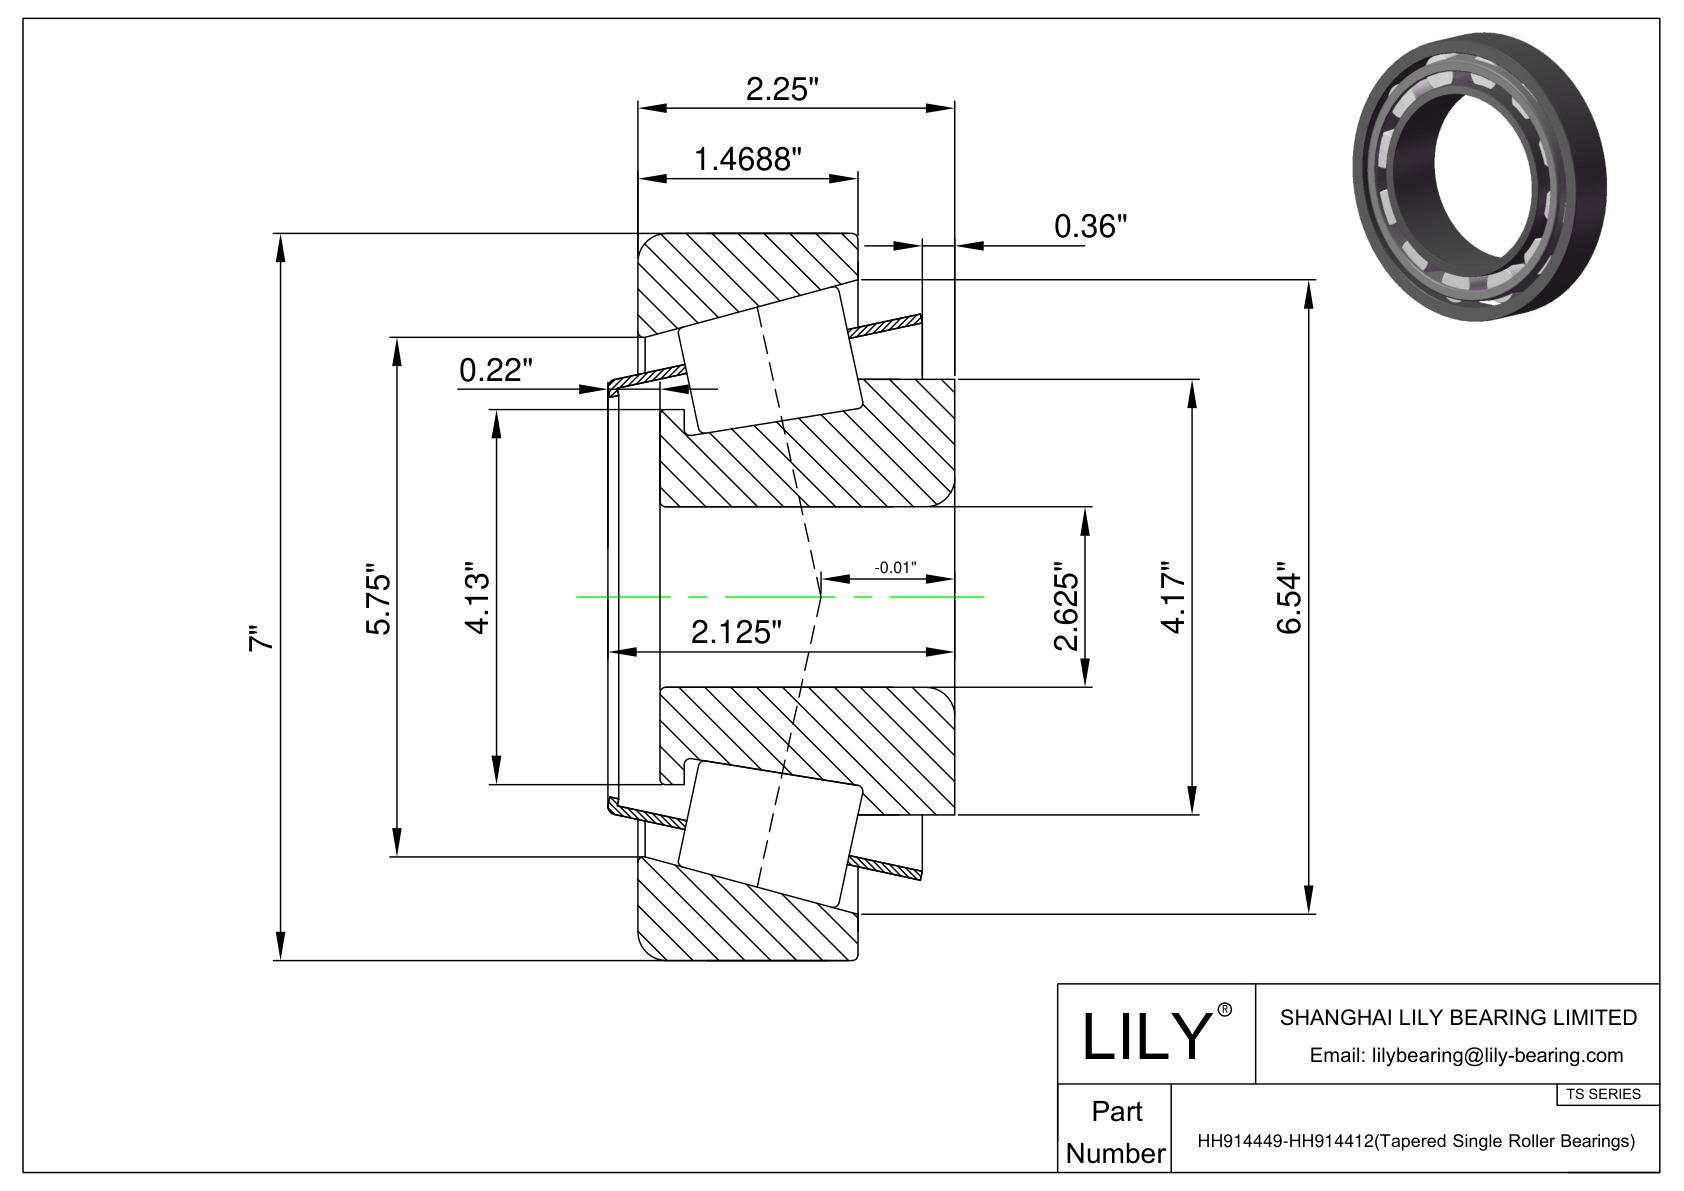 HH914449-HH914412 TS (Tapered Single Roller Bearings) (Imperial) cad drawing